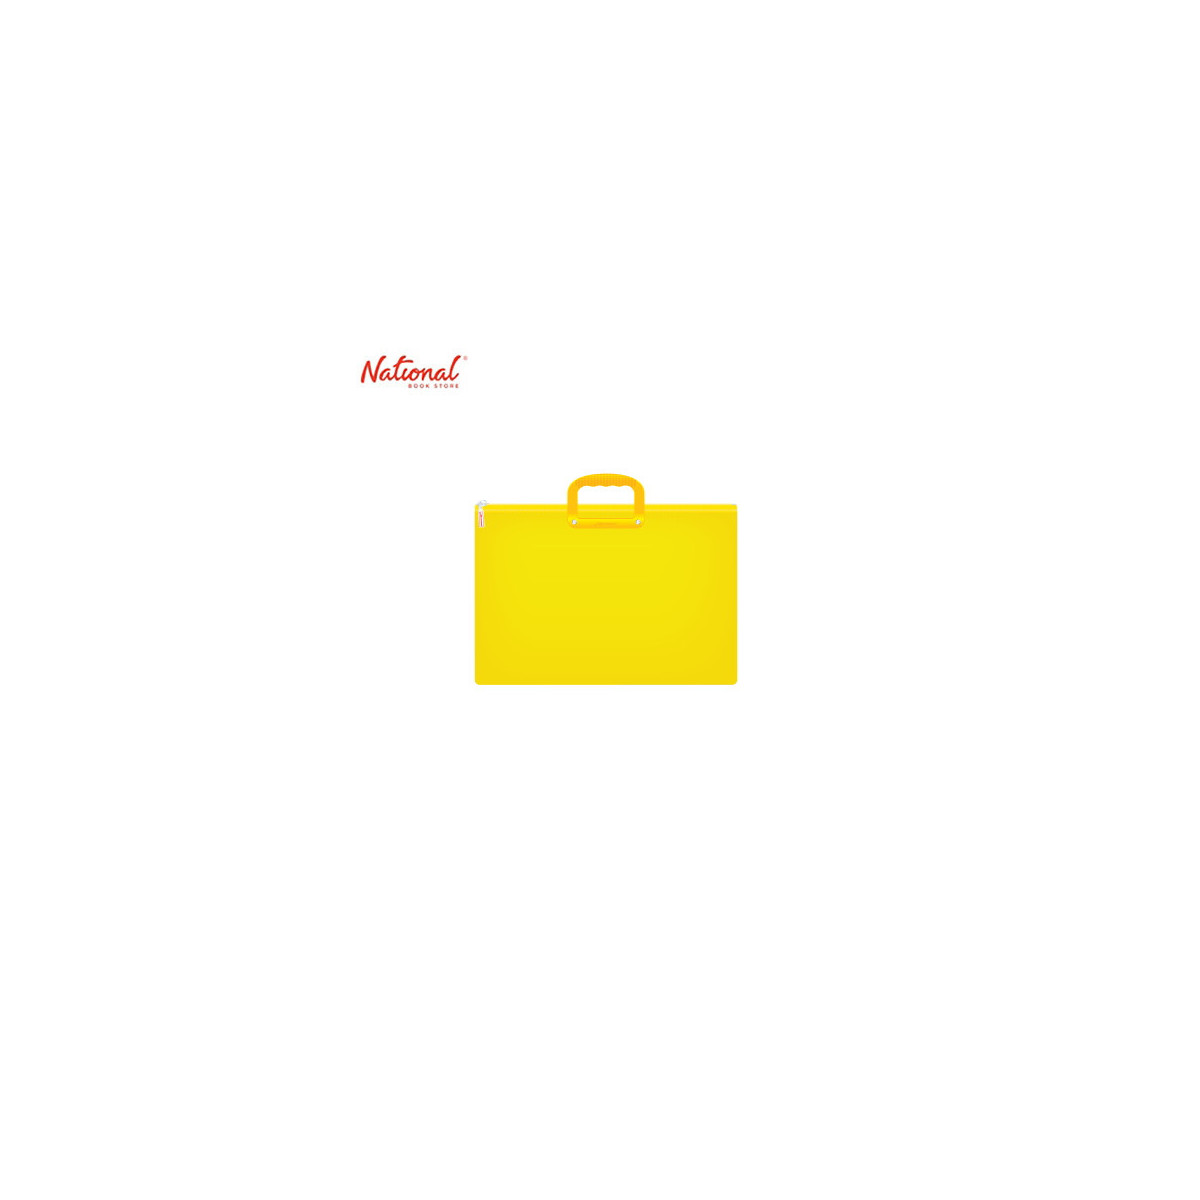 ADVENTURER PLASTIC ENVELOPE EXPANDING WITH HANDLE Z13LWH  LONG ZIPPER LOCK COLORED TRANSPARENT, YELLOW